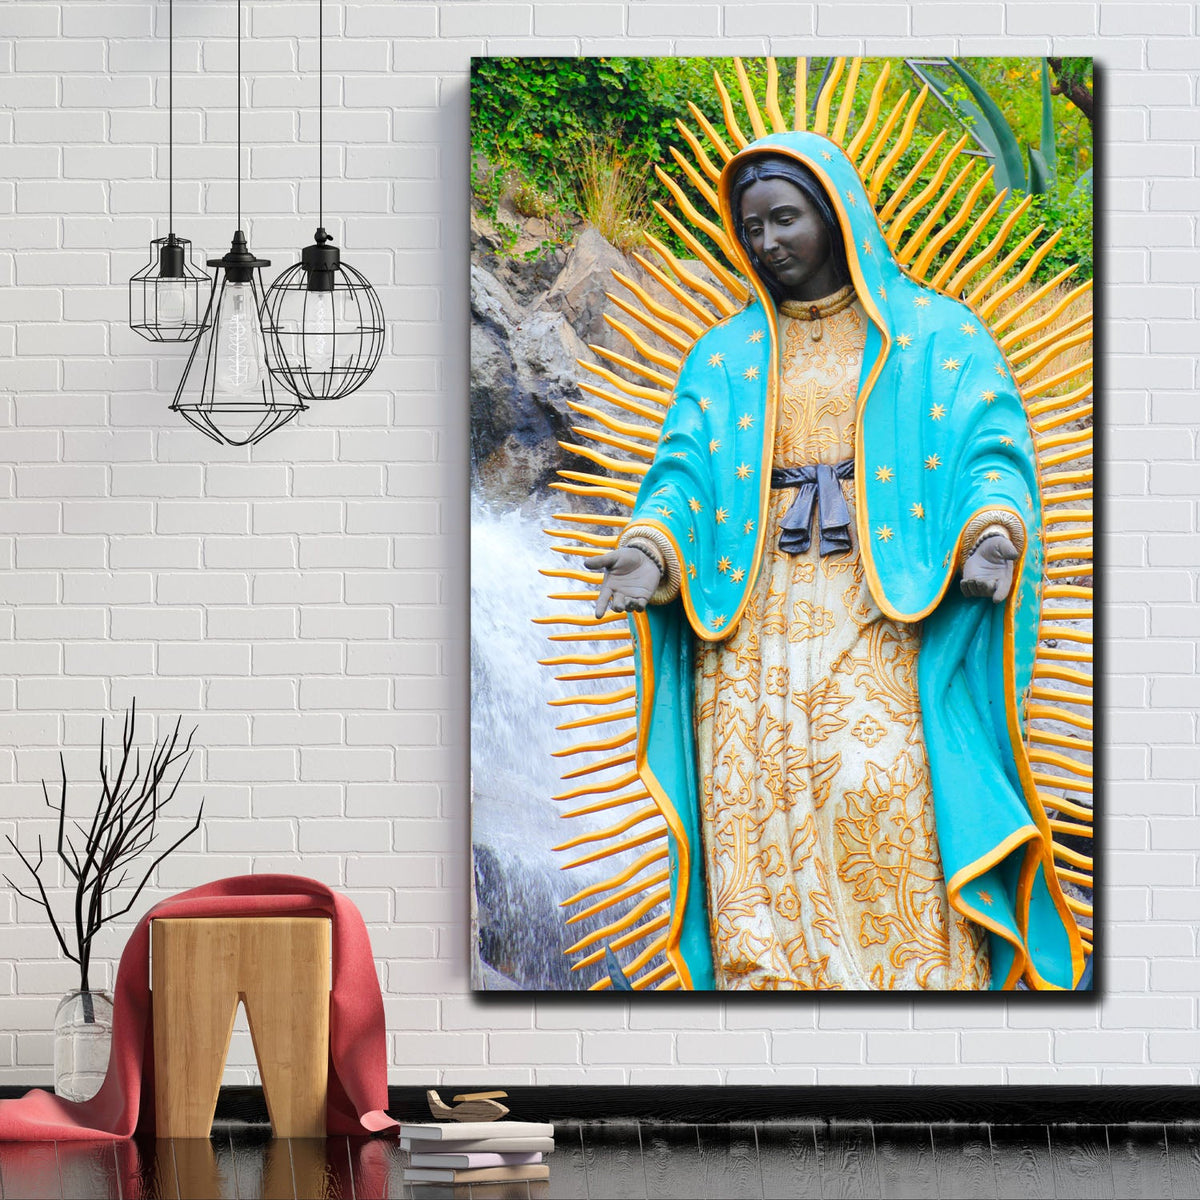 https://cdn.shopify.com/s/files/1/0387/9986/8044/products/TheVirginofGuadalupeCanvasArtprintStretched-1.jpg